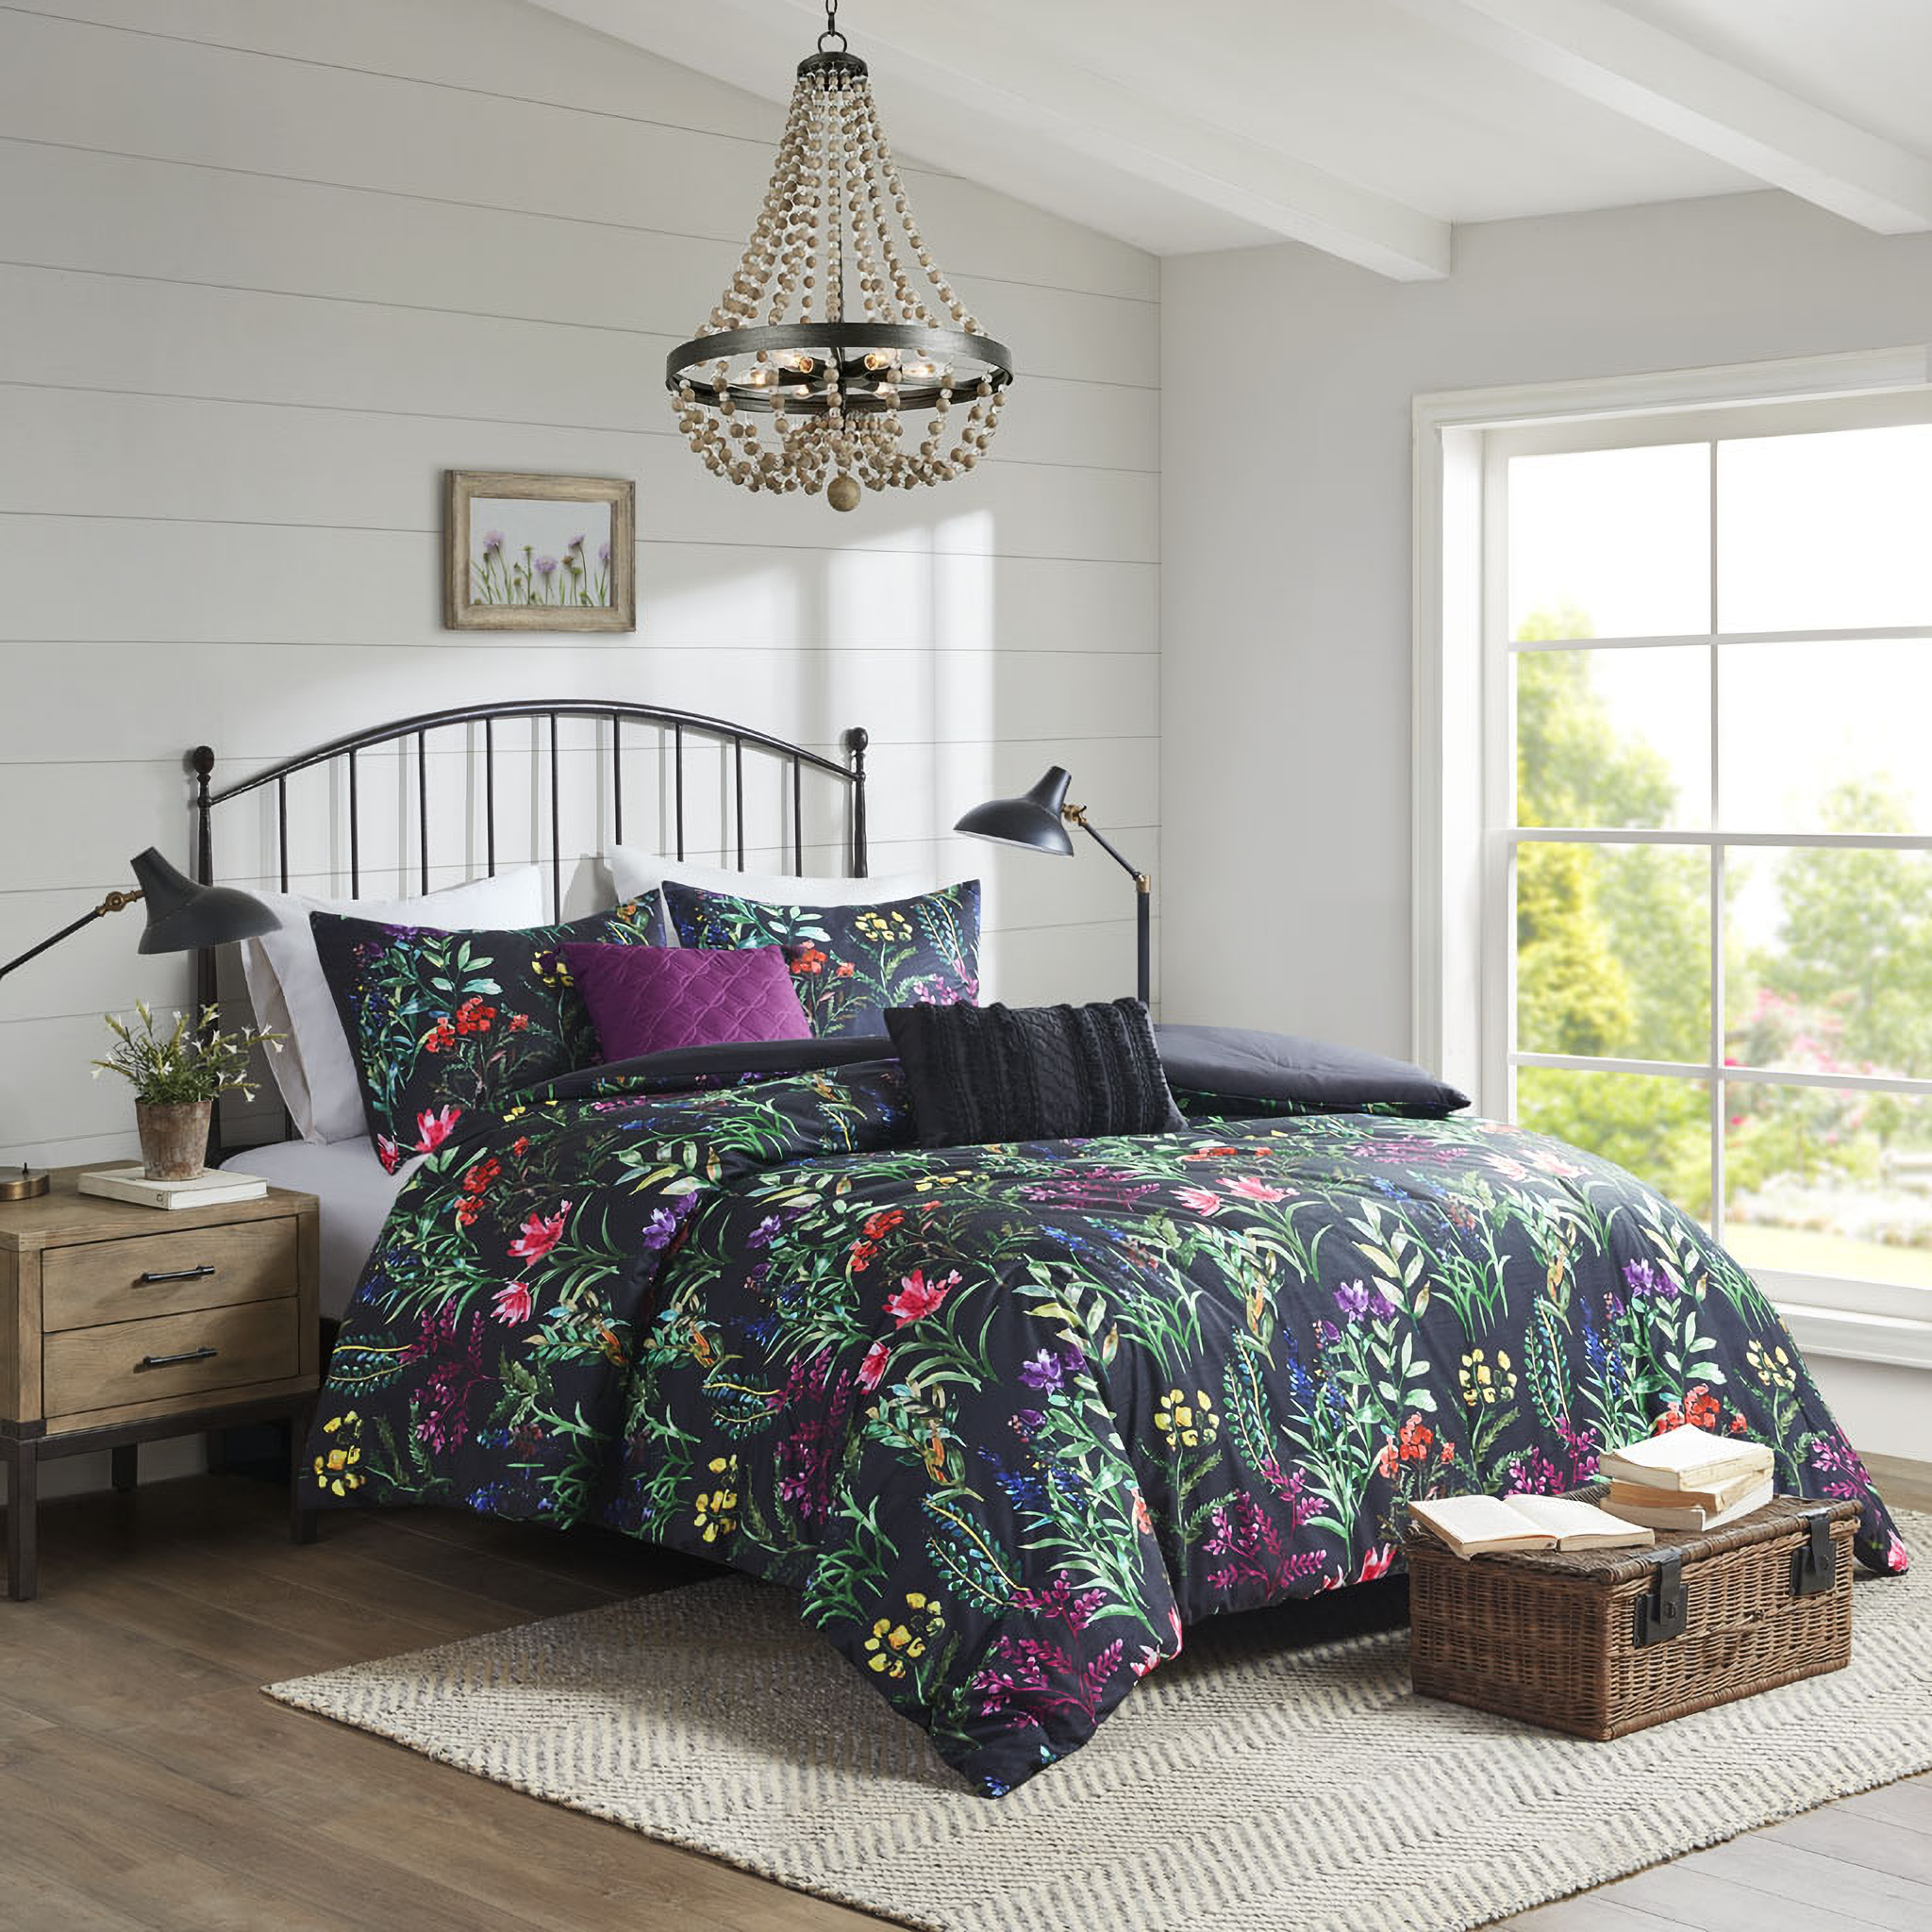 Woolrich Olsen Reversible Quilt Set - Cottage Styling Reversed to